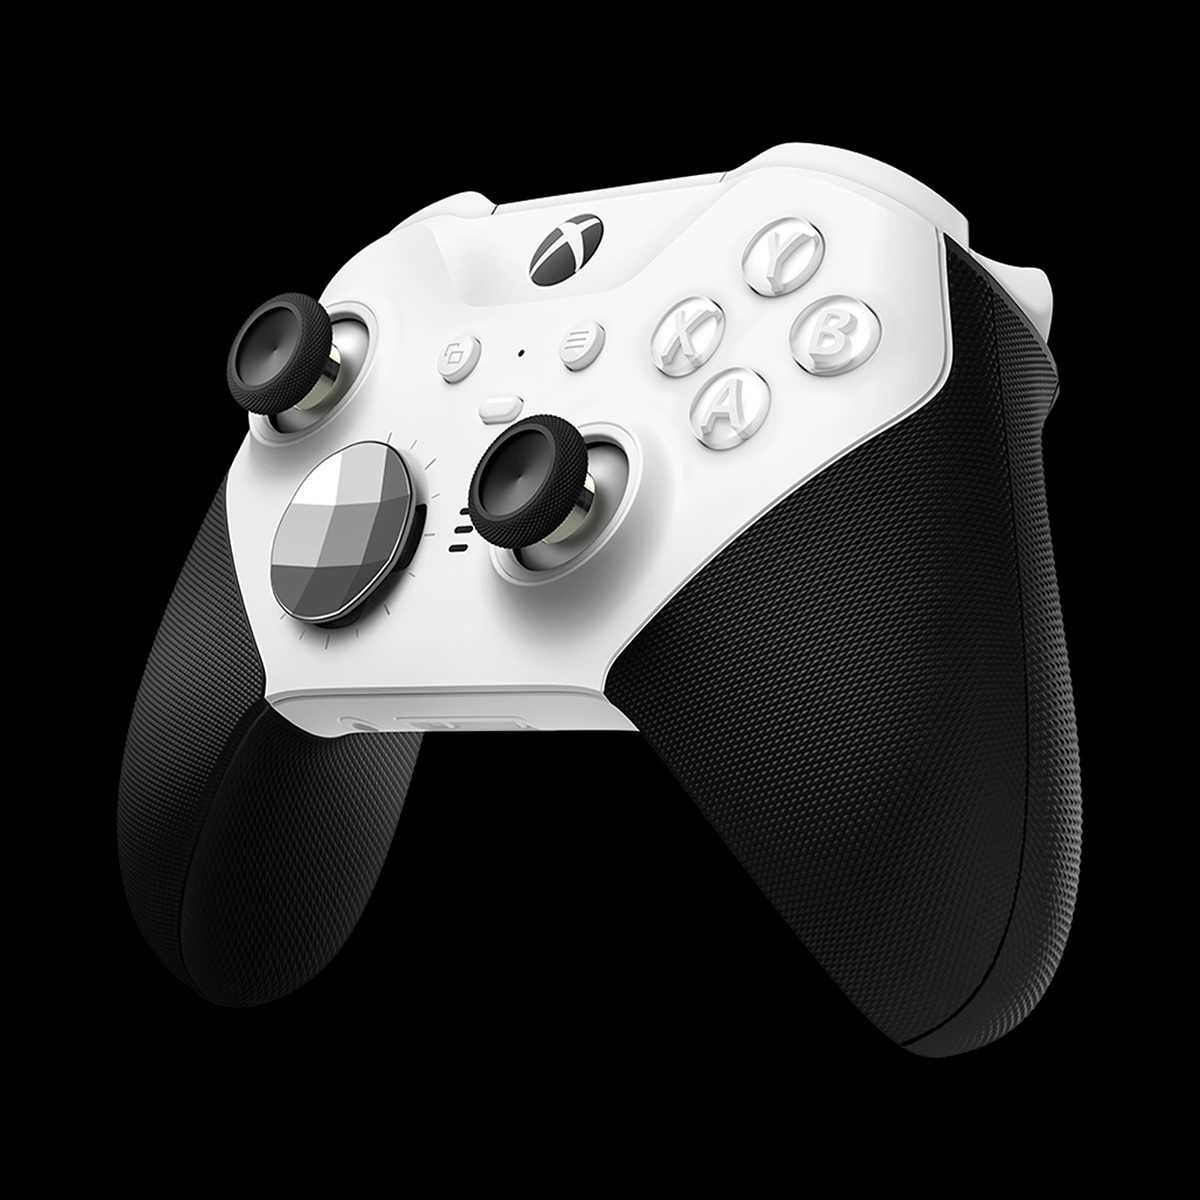 Xbox: here is the new Elite Series 2 Wireless Controller - Core